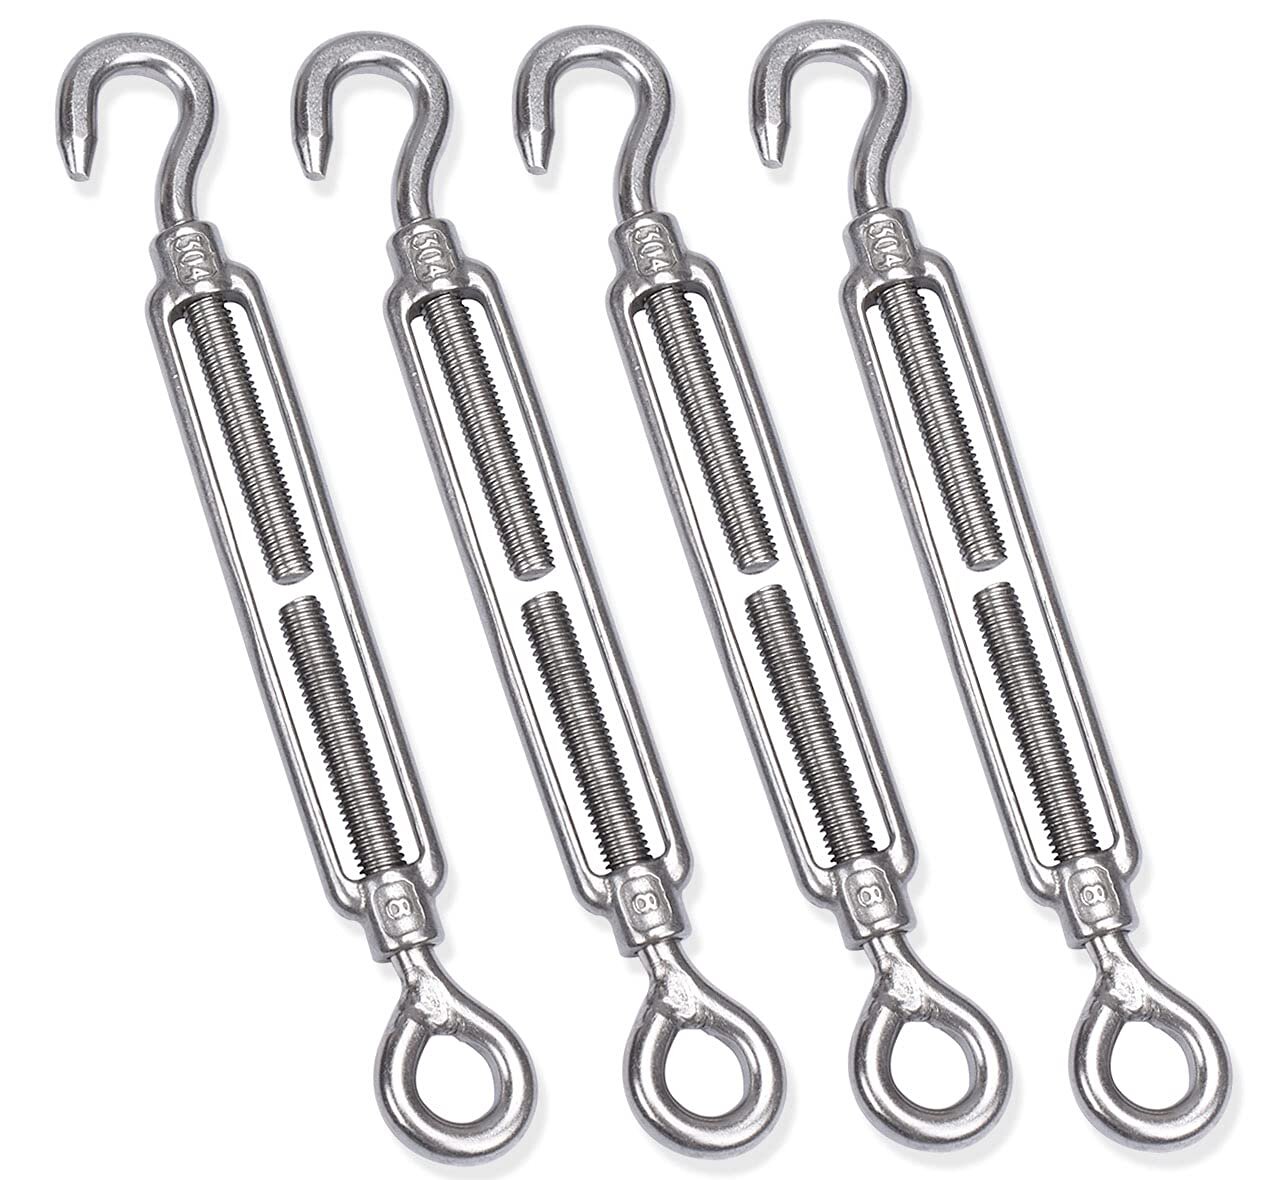 M8 Turnbuckle M8 Turnbuckle,Thread Stainless Steel Hook & Eye Alele Stainless Steel 304 Turnbuckle Heavy Duty Wire Rope Tension 4pcs